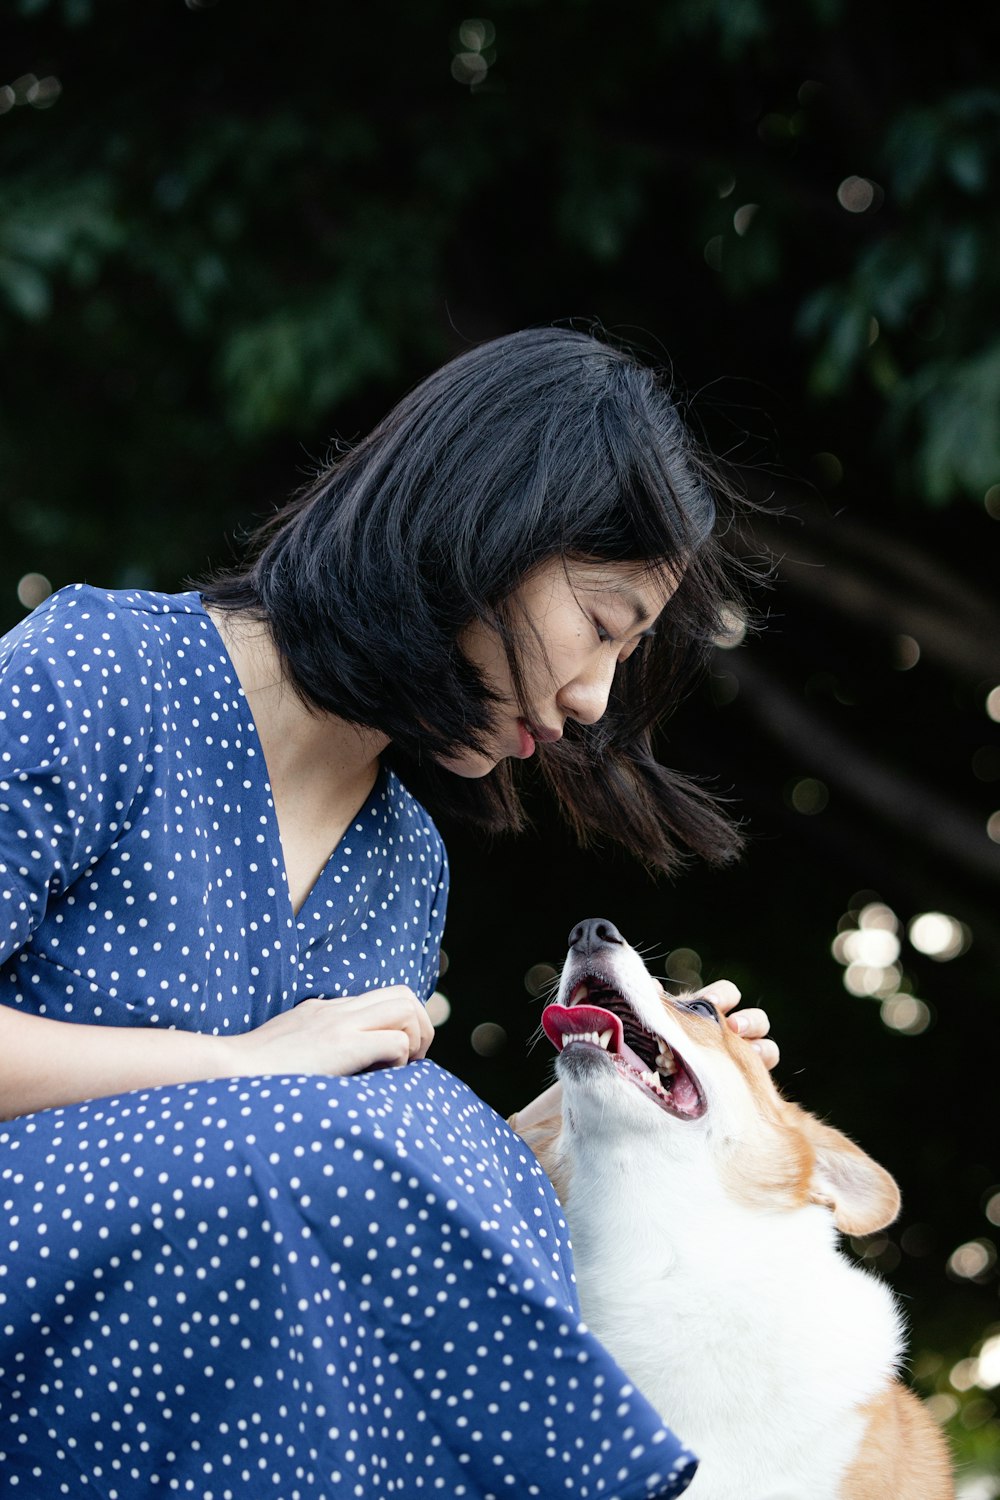 woman in blue and white polka dot dress holding white short coated dog